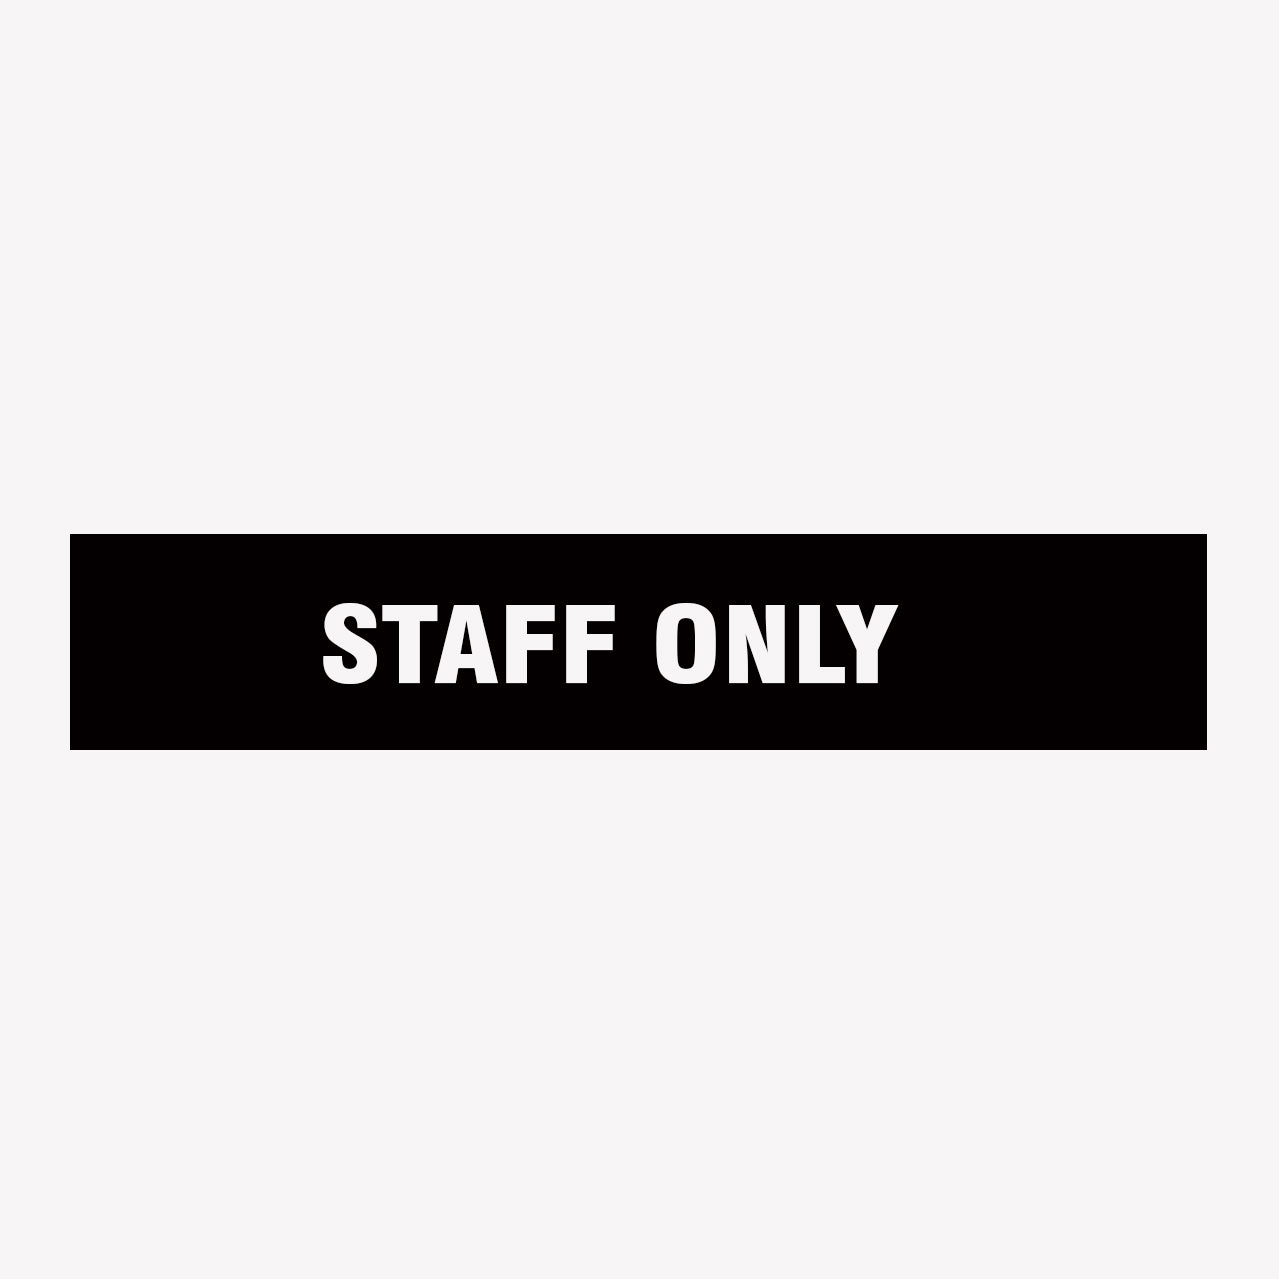 STAFF ONLY SIGN - GET SIGNS